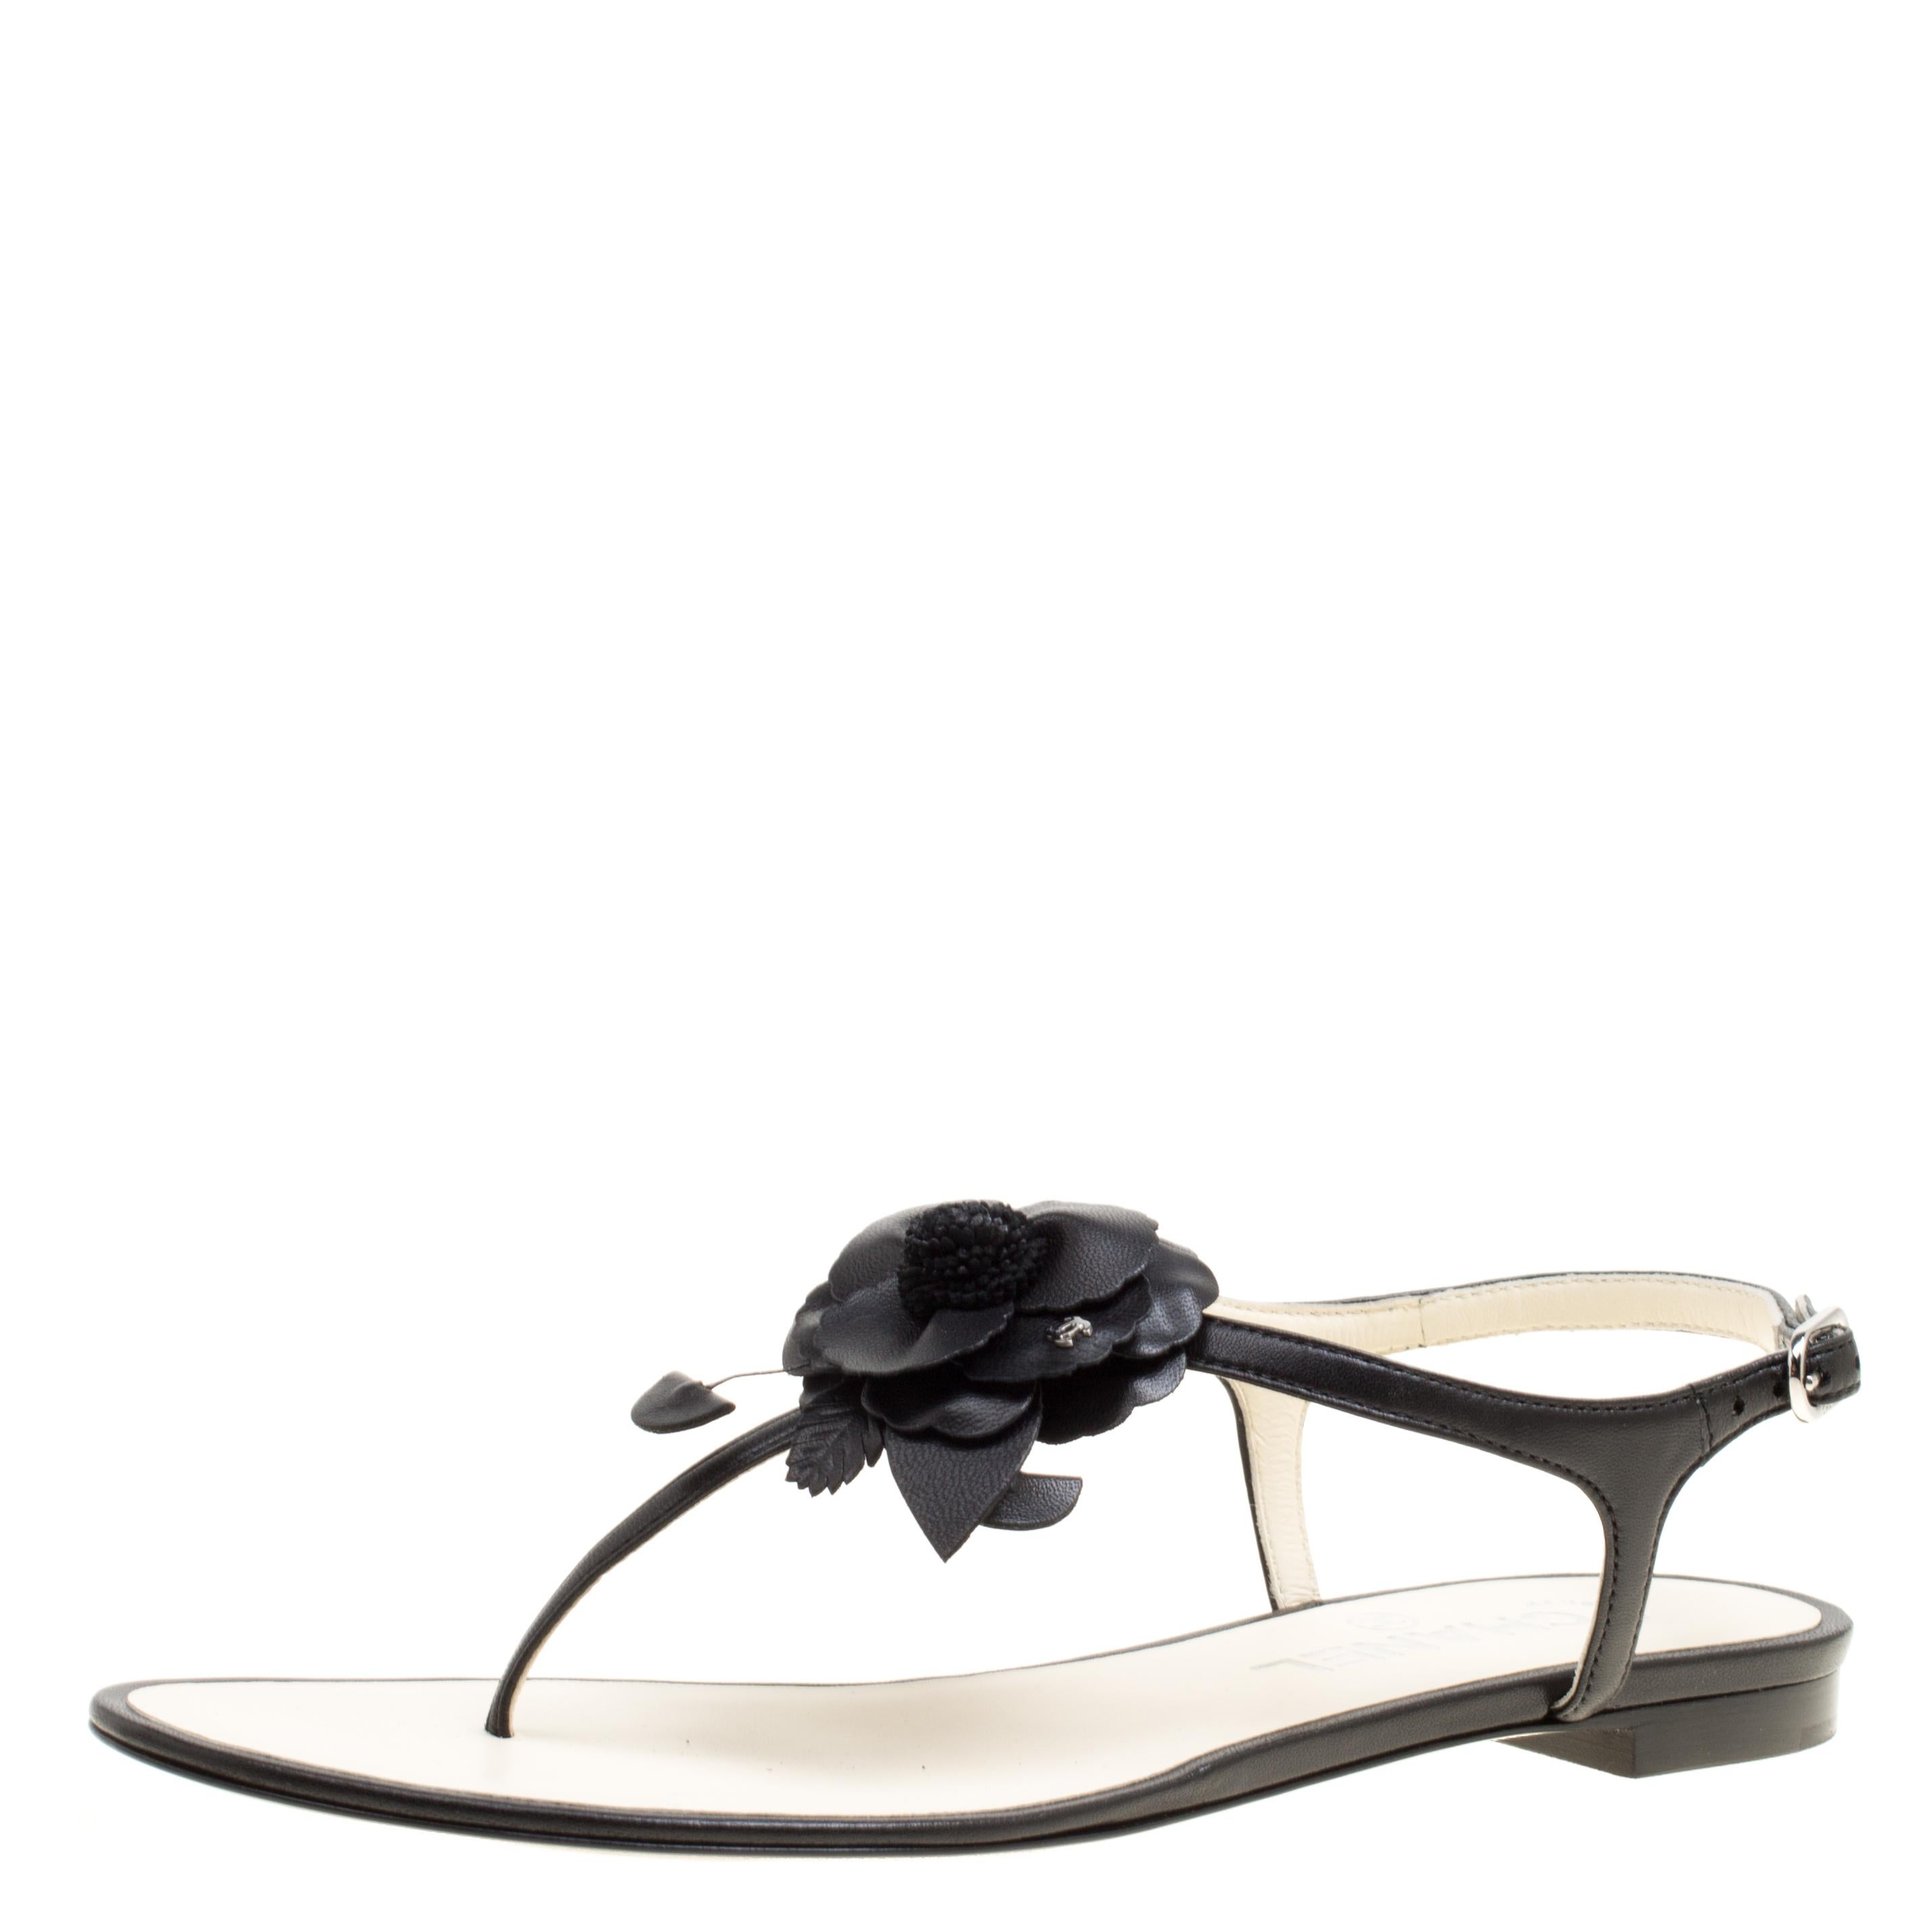 This summer, give the Chanel touch to your outfit by stepping out in these thong sandals. Crafted from black leather, this pair features a t-strap and buckle fastening at the ankles. The pair is complete with a CC-adorned Camellia flower on the